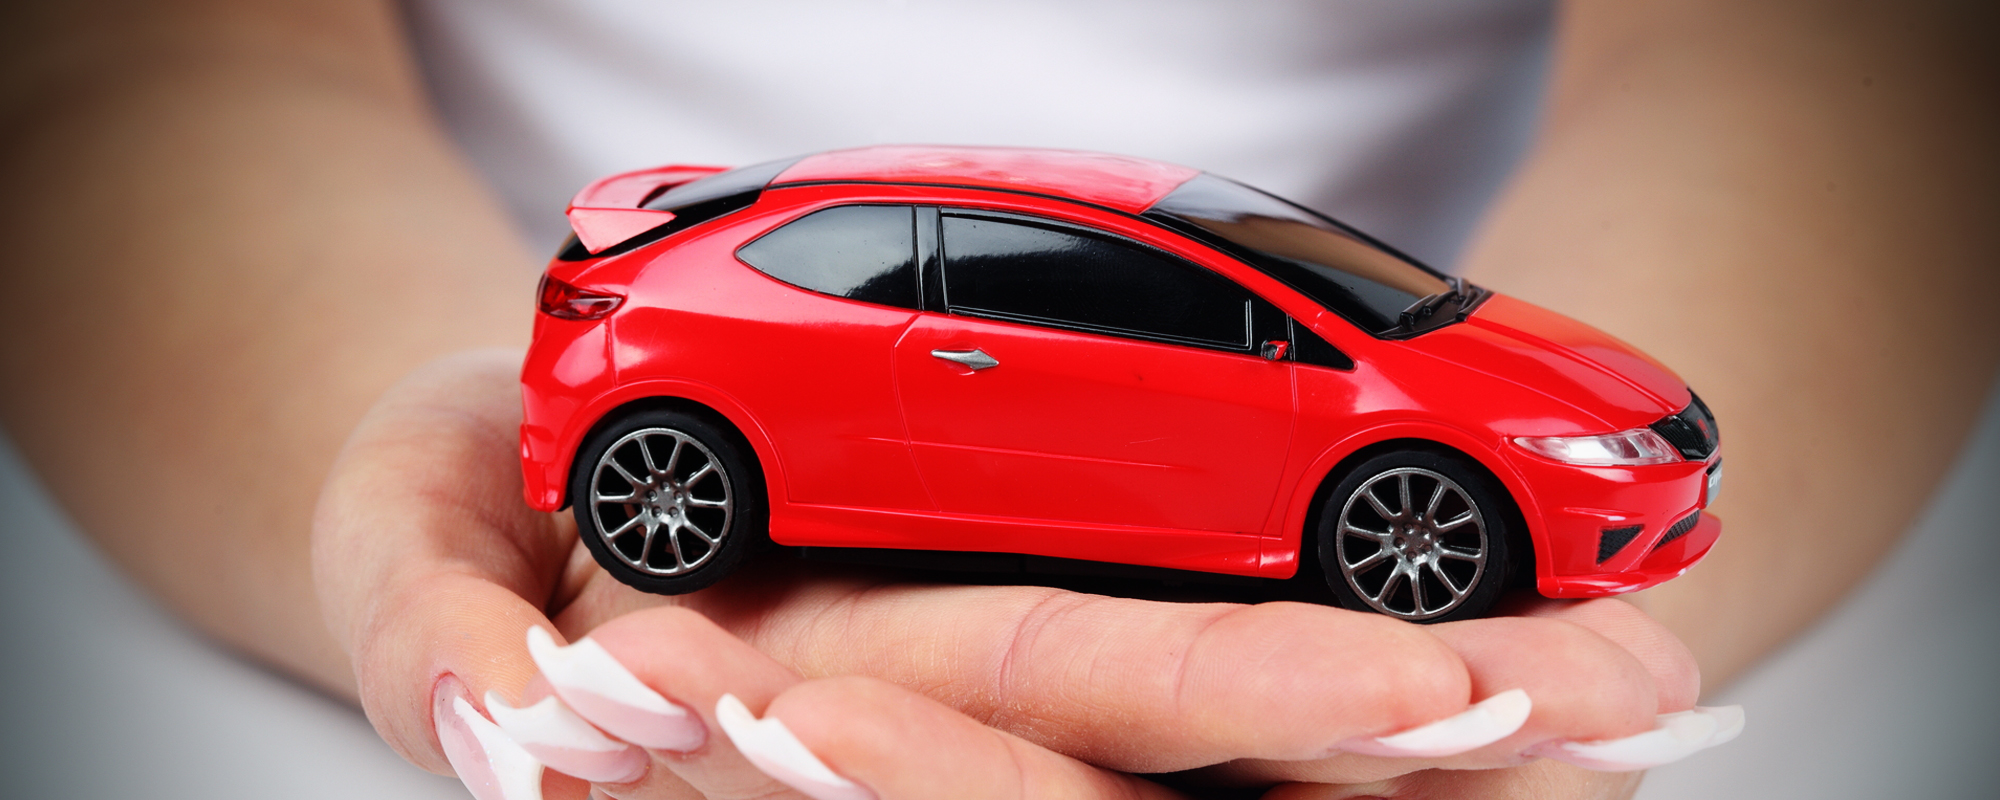 Mantain a smooth ride: <a href='car-care.php'>Car Care Tips</a>.